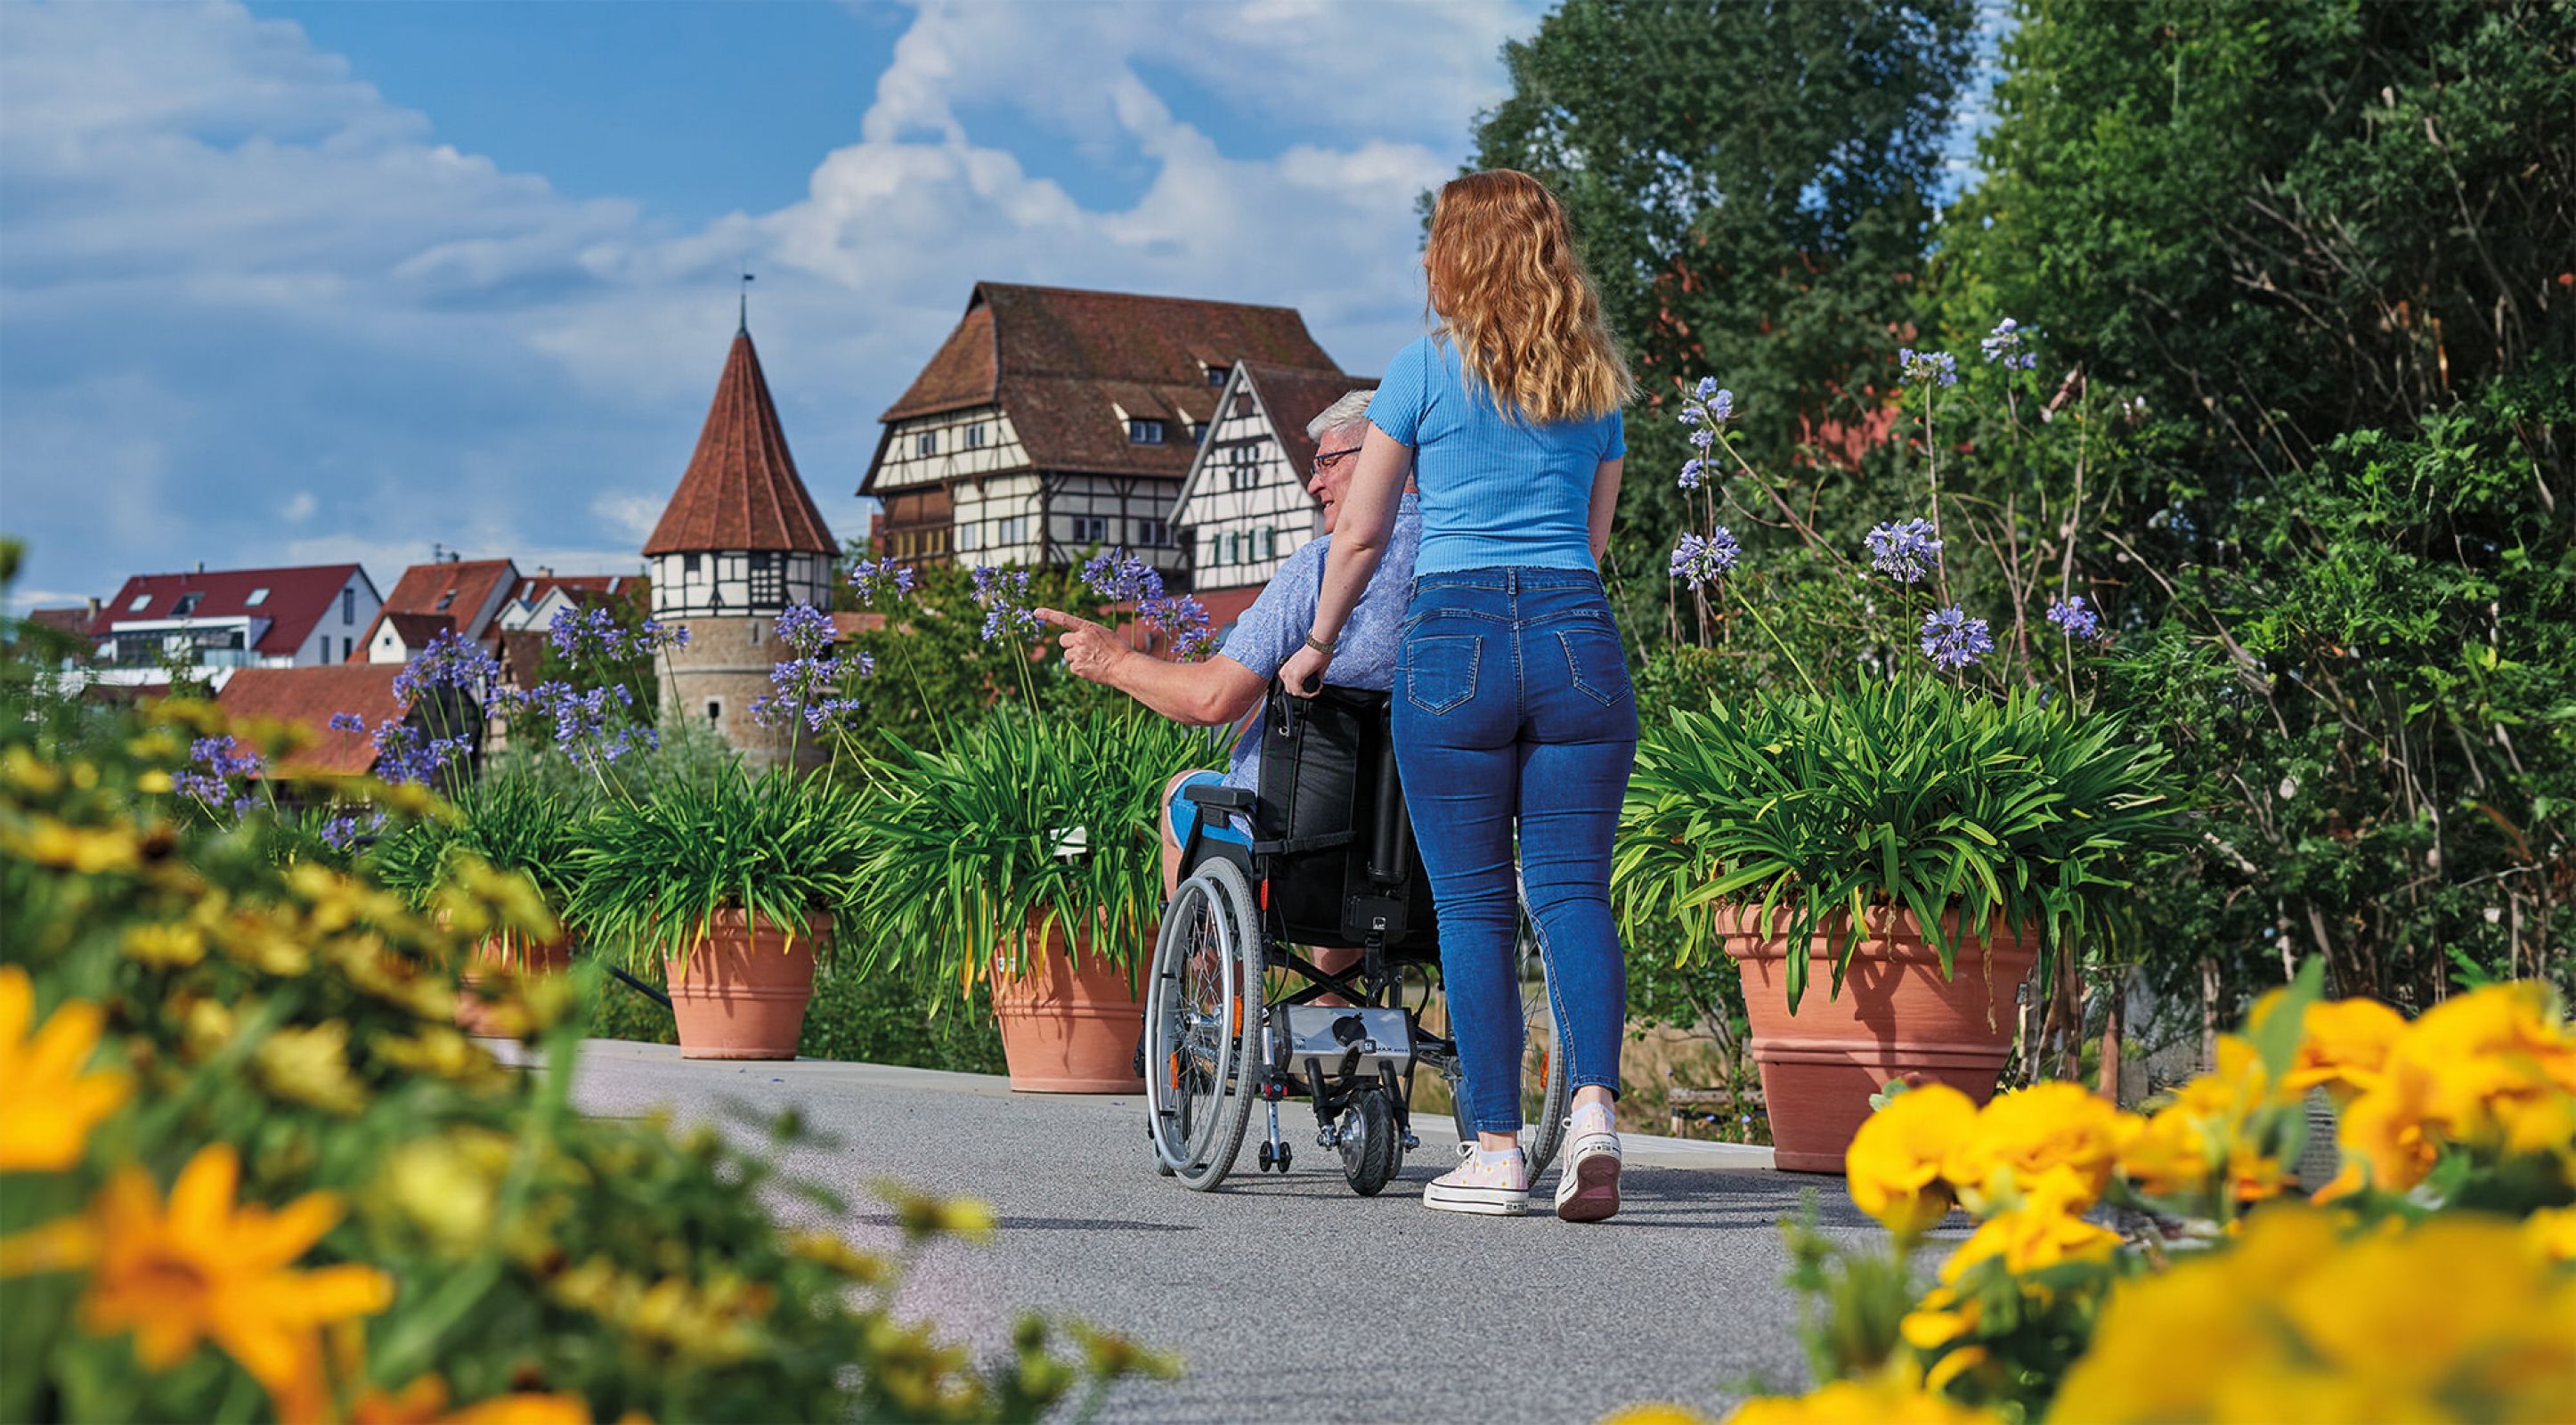 The picture shows a young woman from behind pushing an elderly man in a wheelchair up through an old town. In the foreground and background are many flowers. The wheelchair is equipped with a V-MAX mini pushing aid which supports pushing.